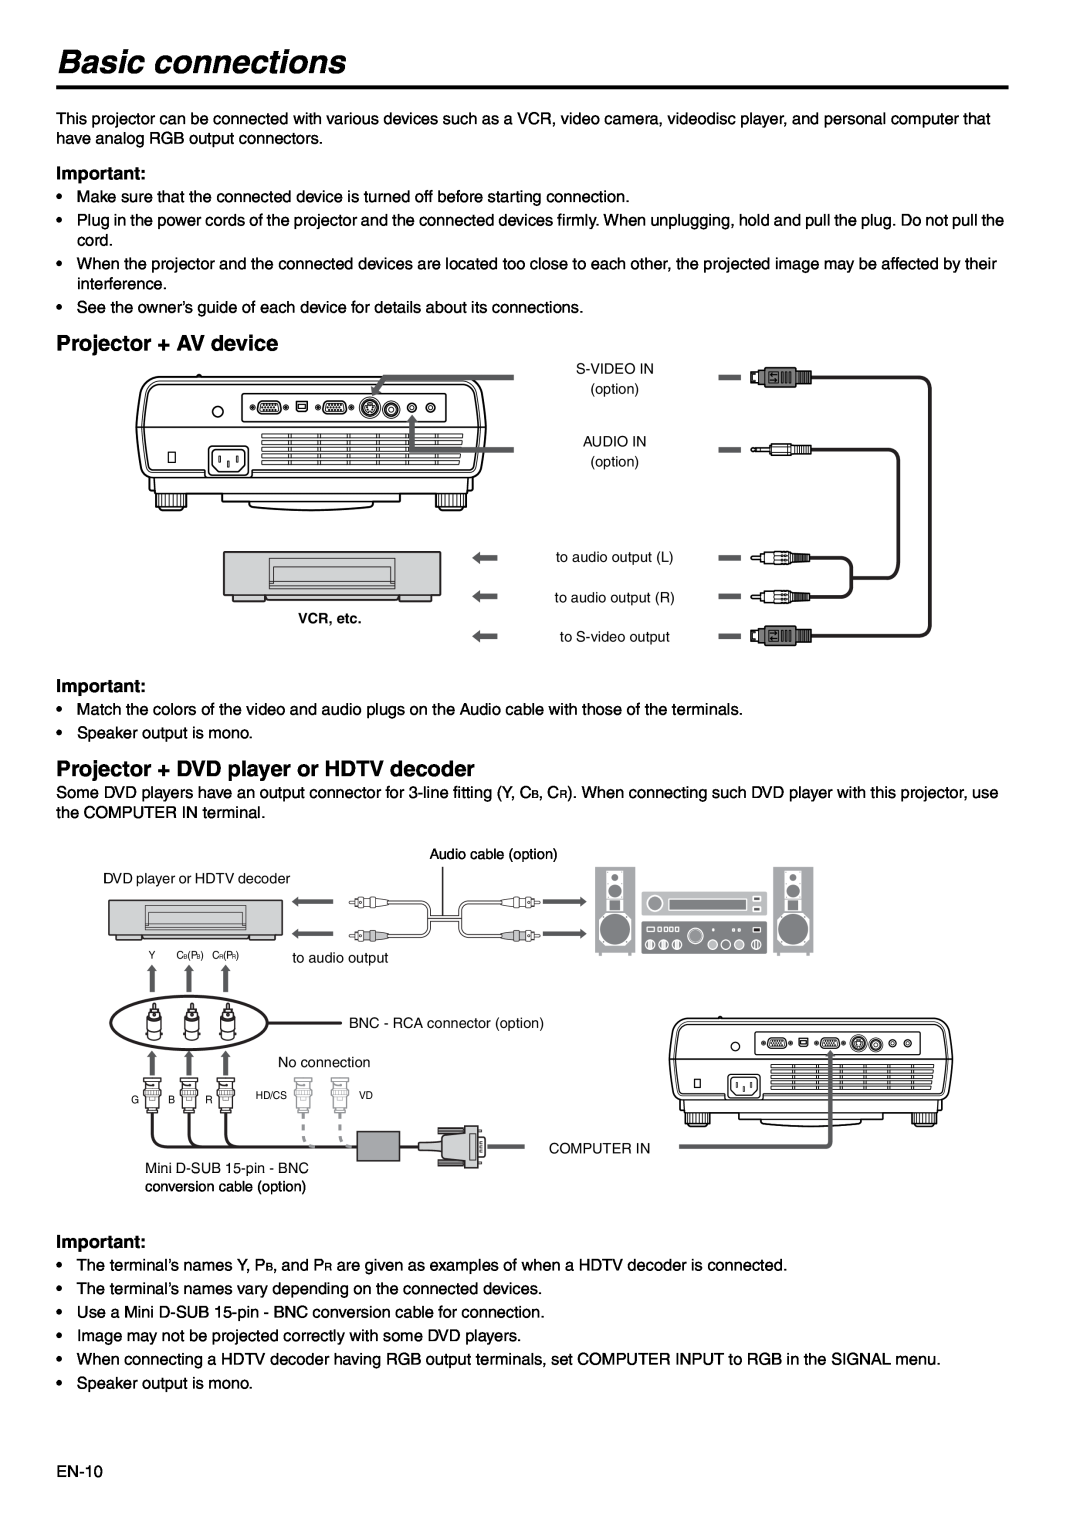 Mitsubishi Electronics XD110, SD110 Basic connections, Projector + AV device, Projector + DVD player or HDTV decoder 